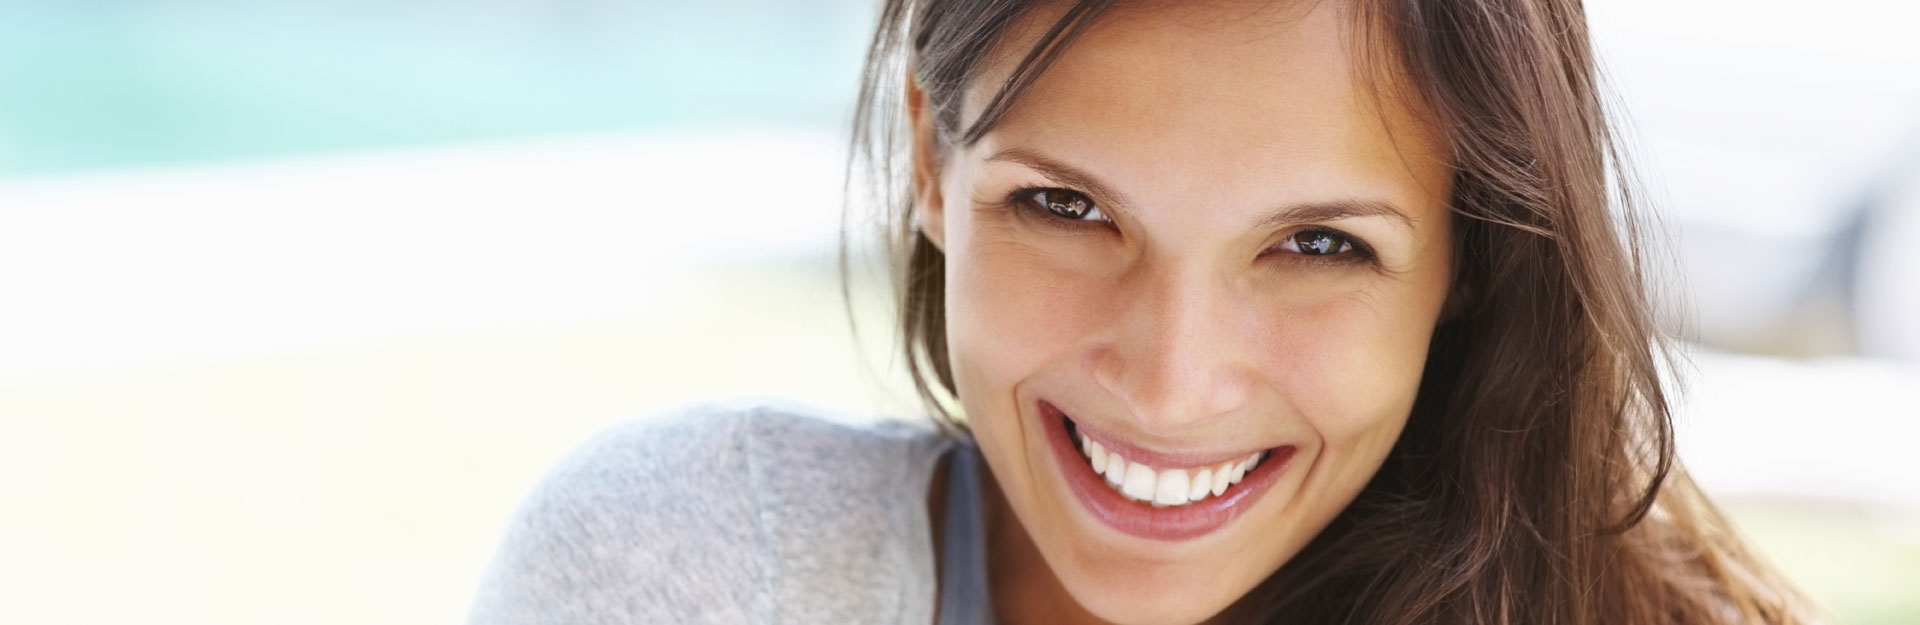 5 Things to Know Before Getting a Brighter Smile